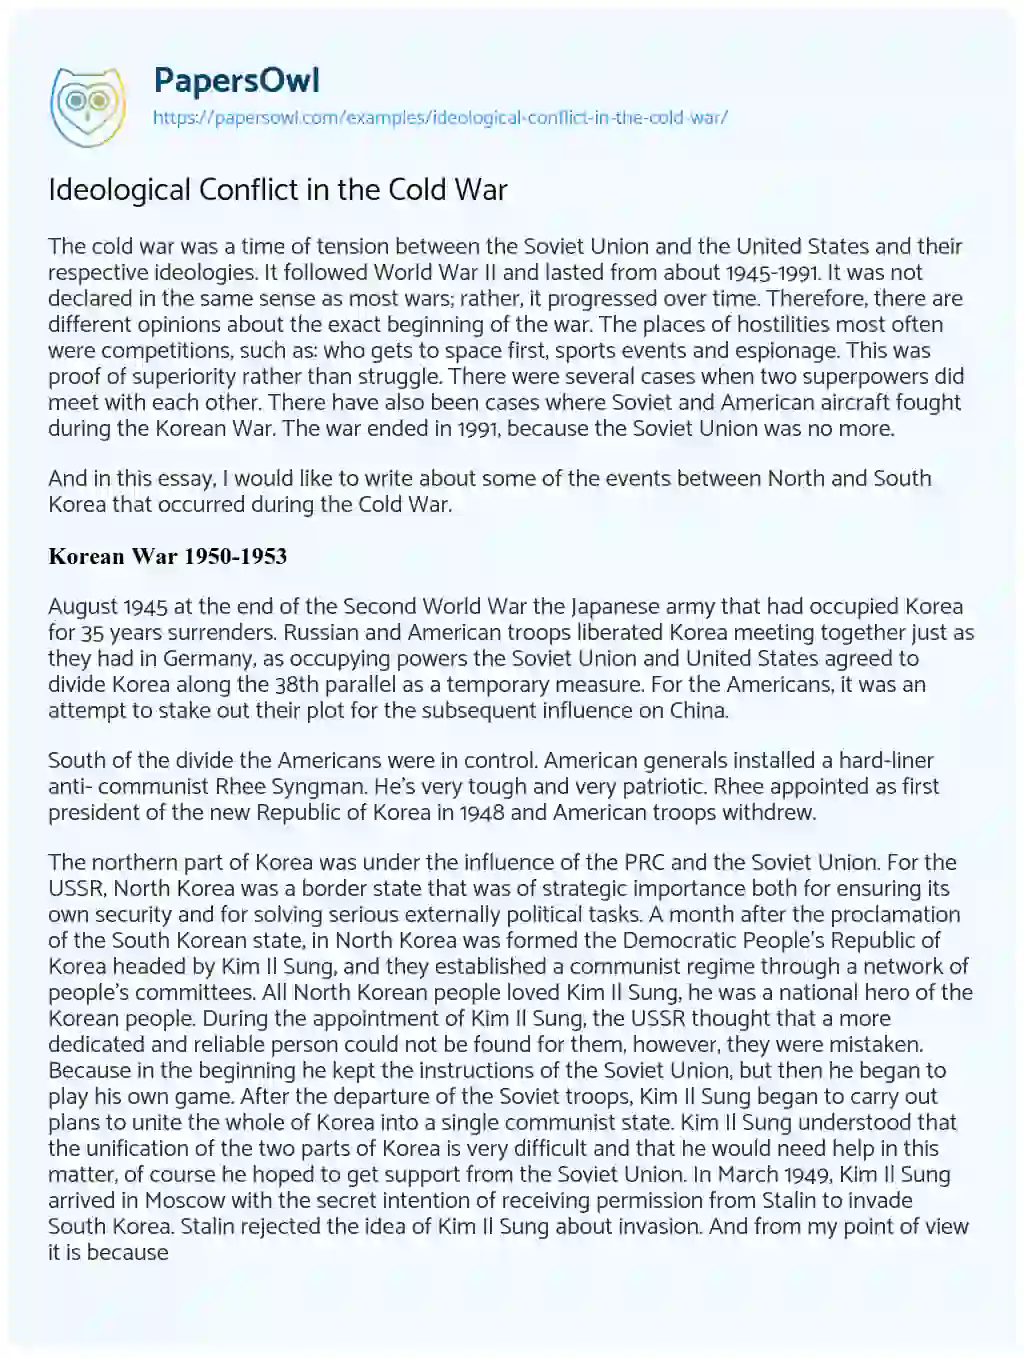 Essay on Ideological Conflict in the Cold War